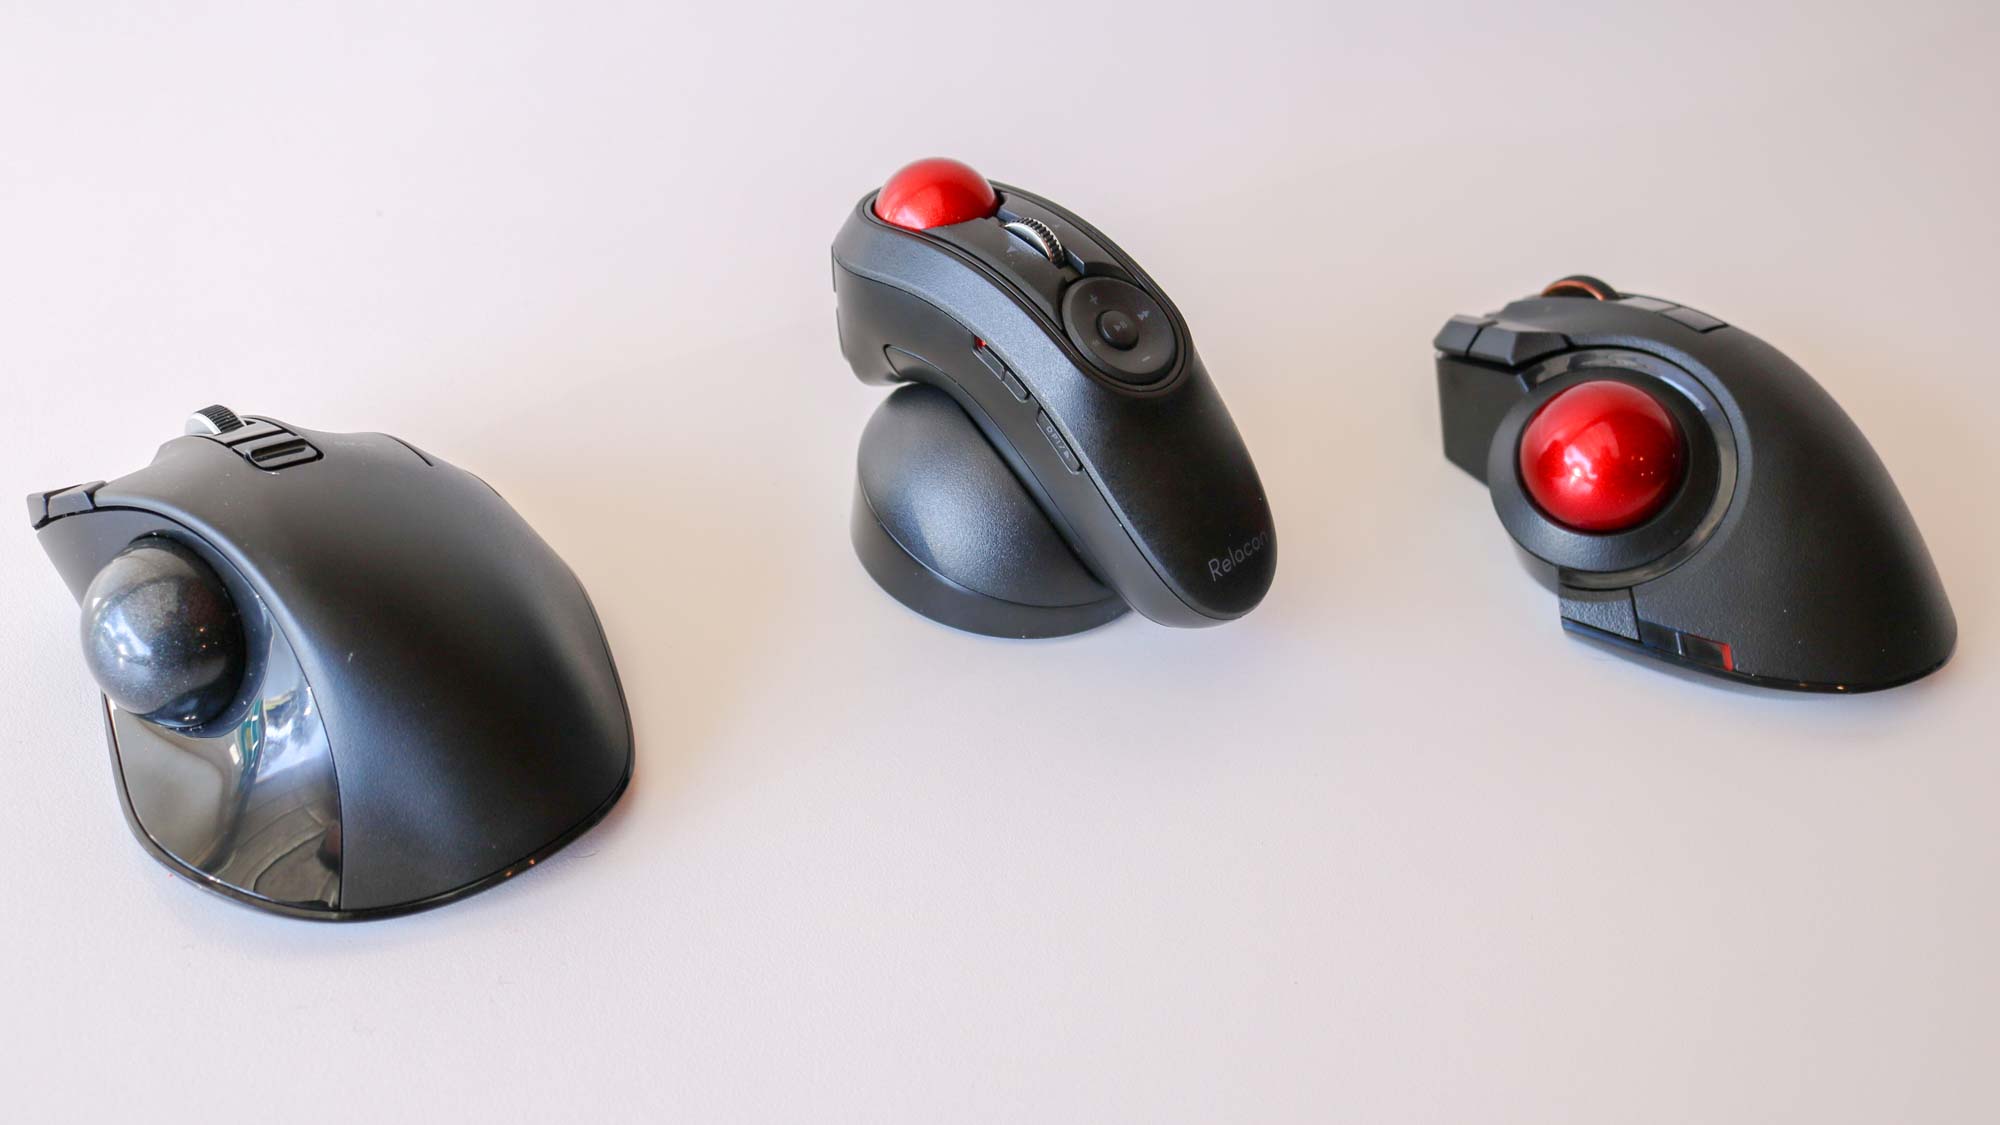 Forget Logitech — I'm obsessed with this Japanese trackball mouse maker